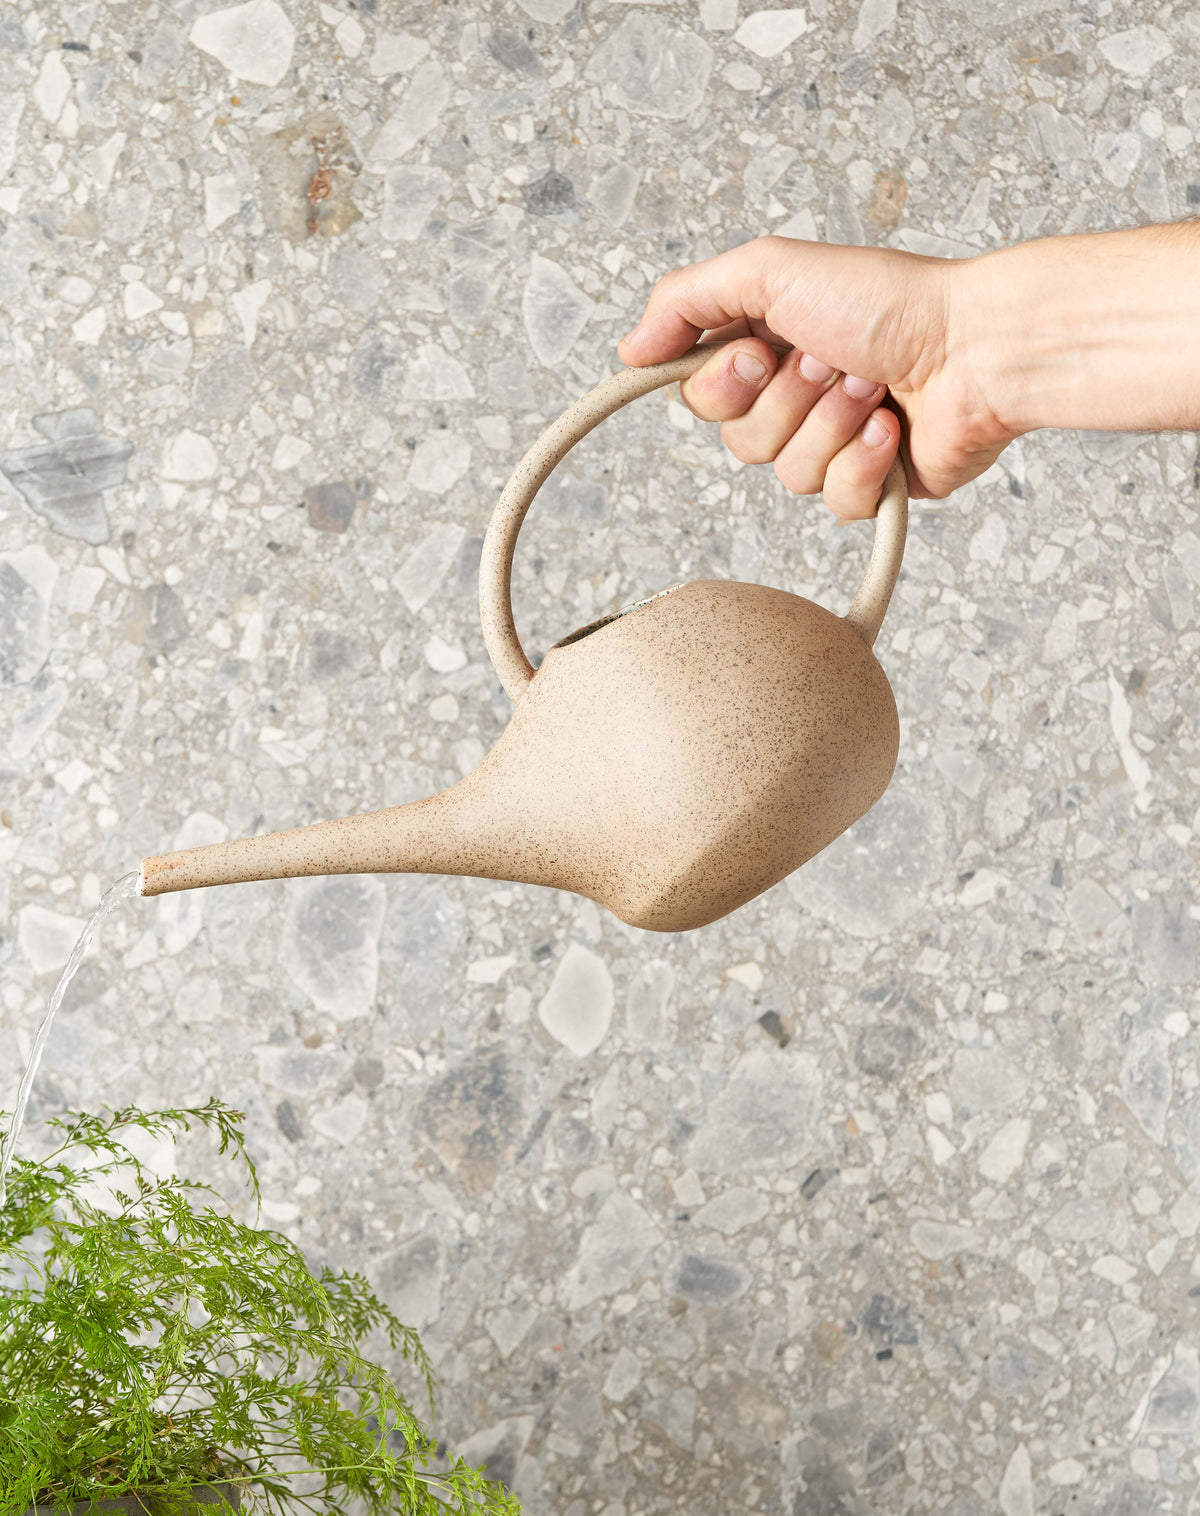 Garden to Table Watering Can